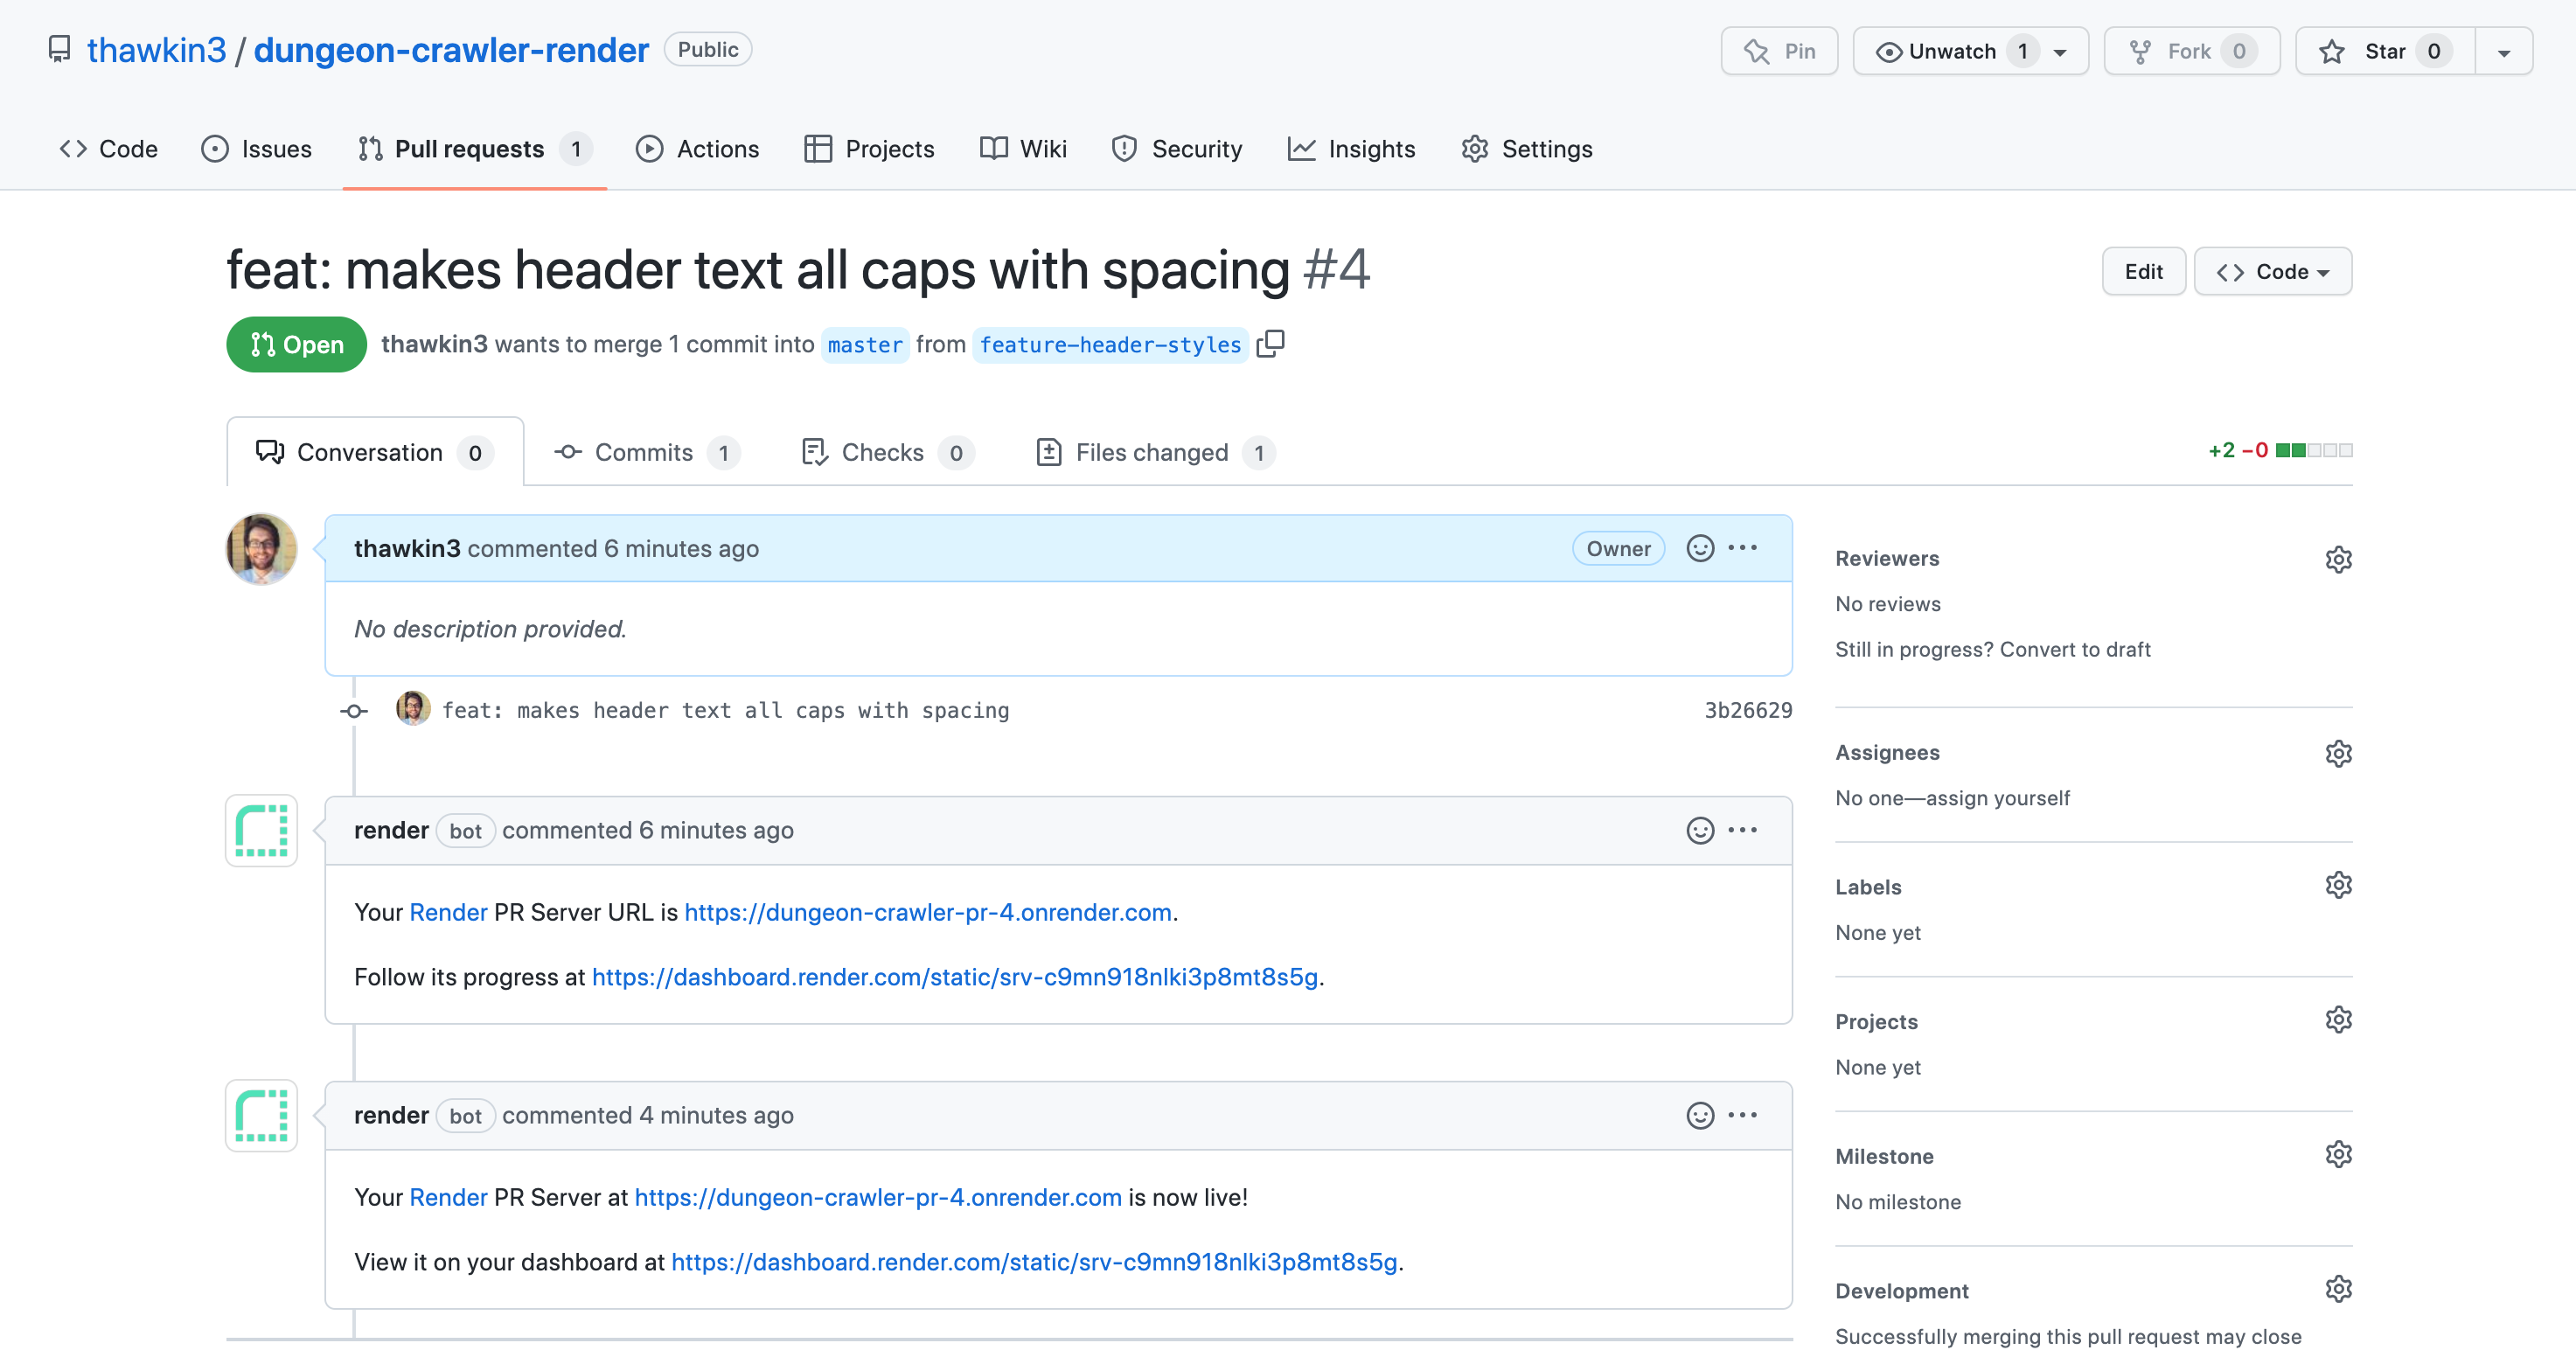 Comments on GitHub pull requests with links to review app